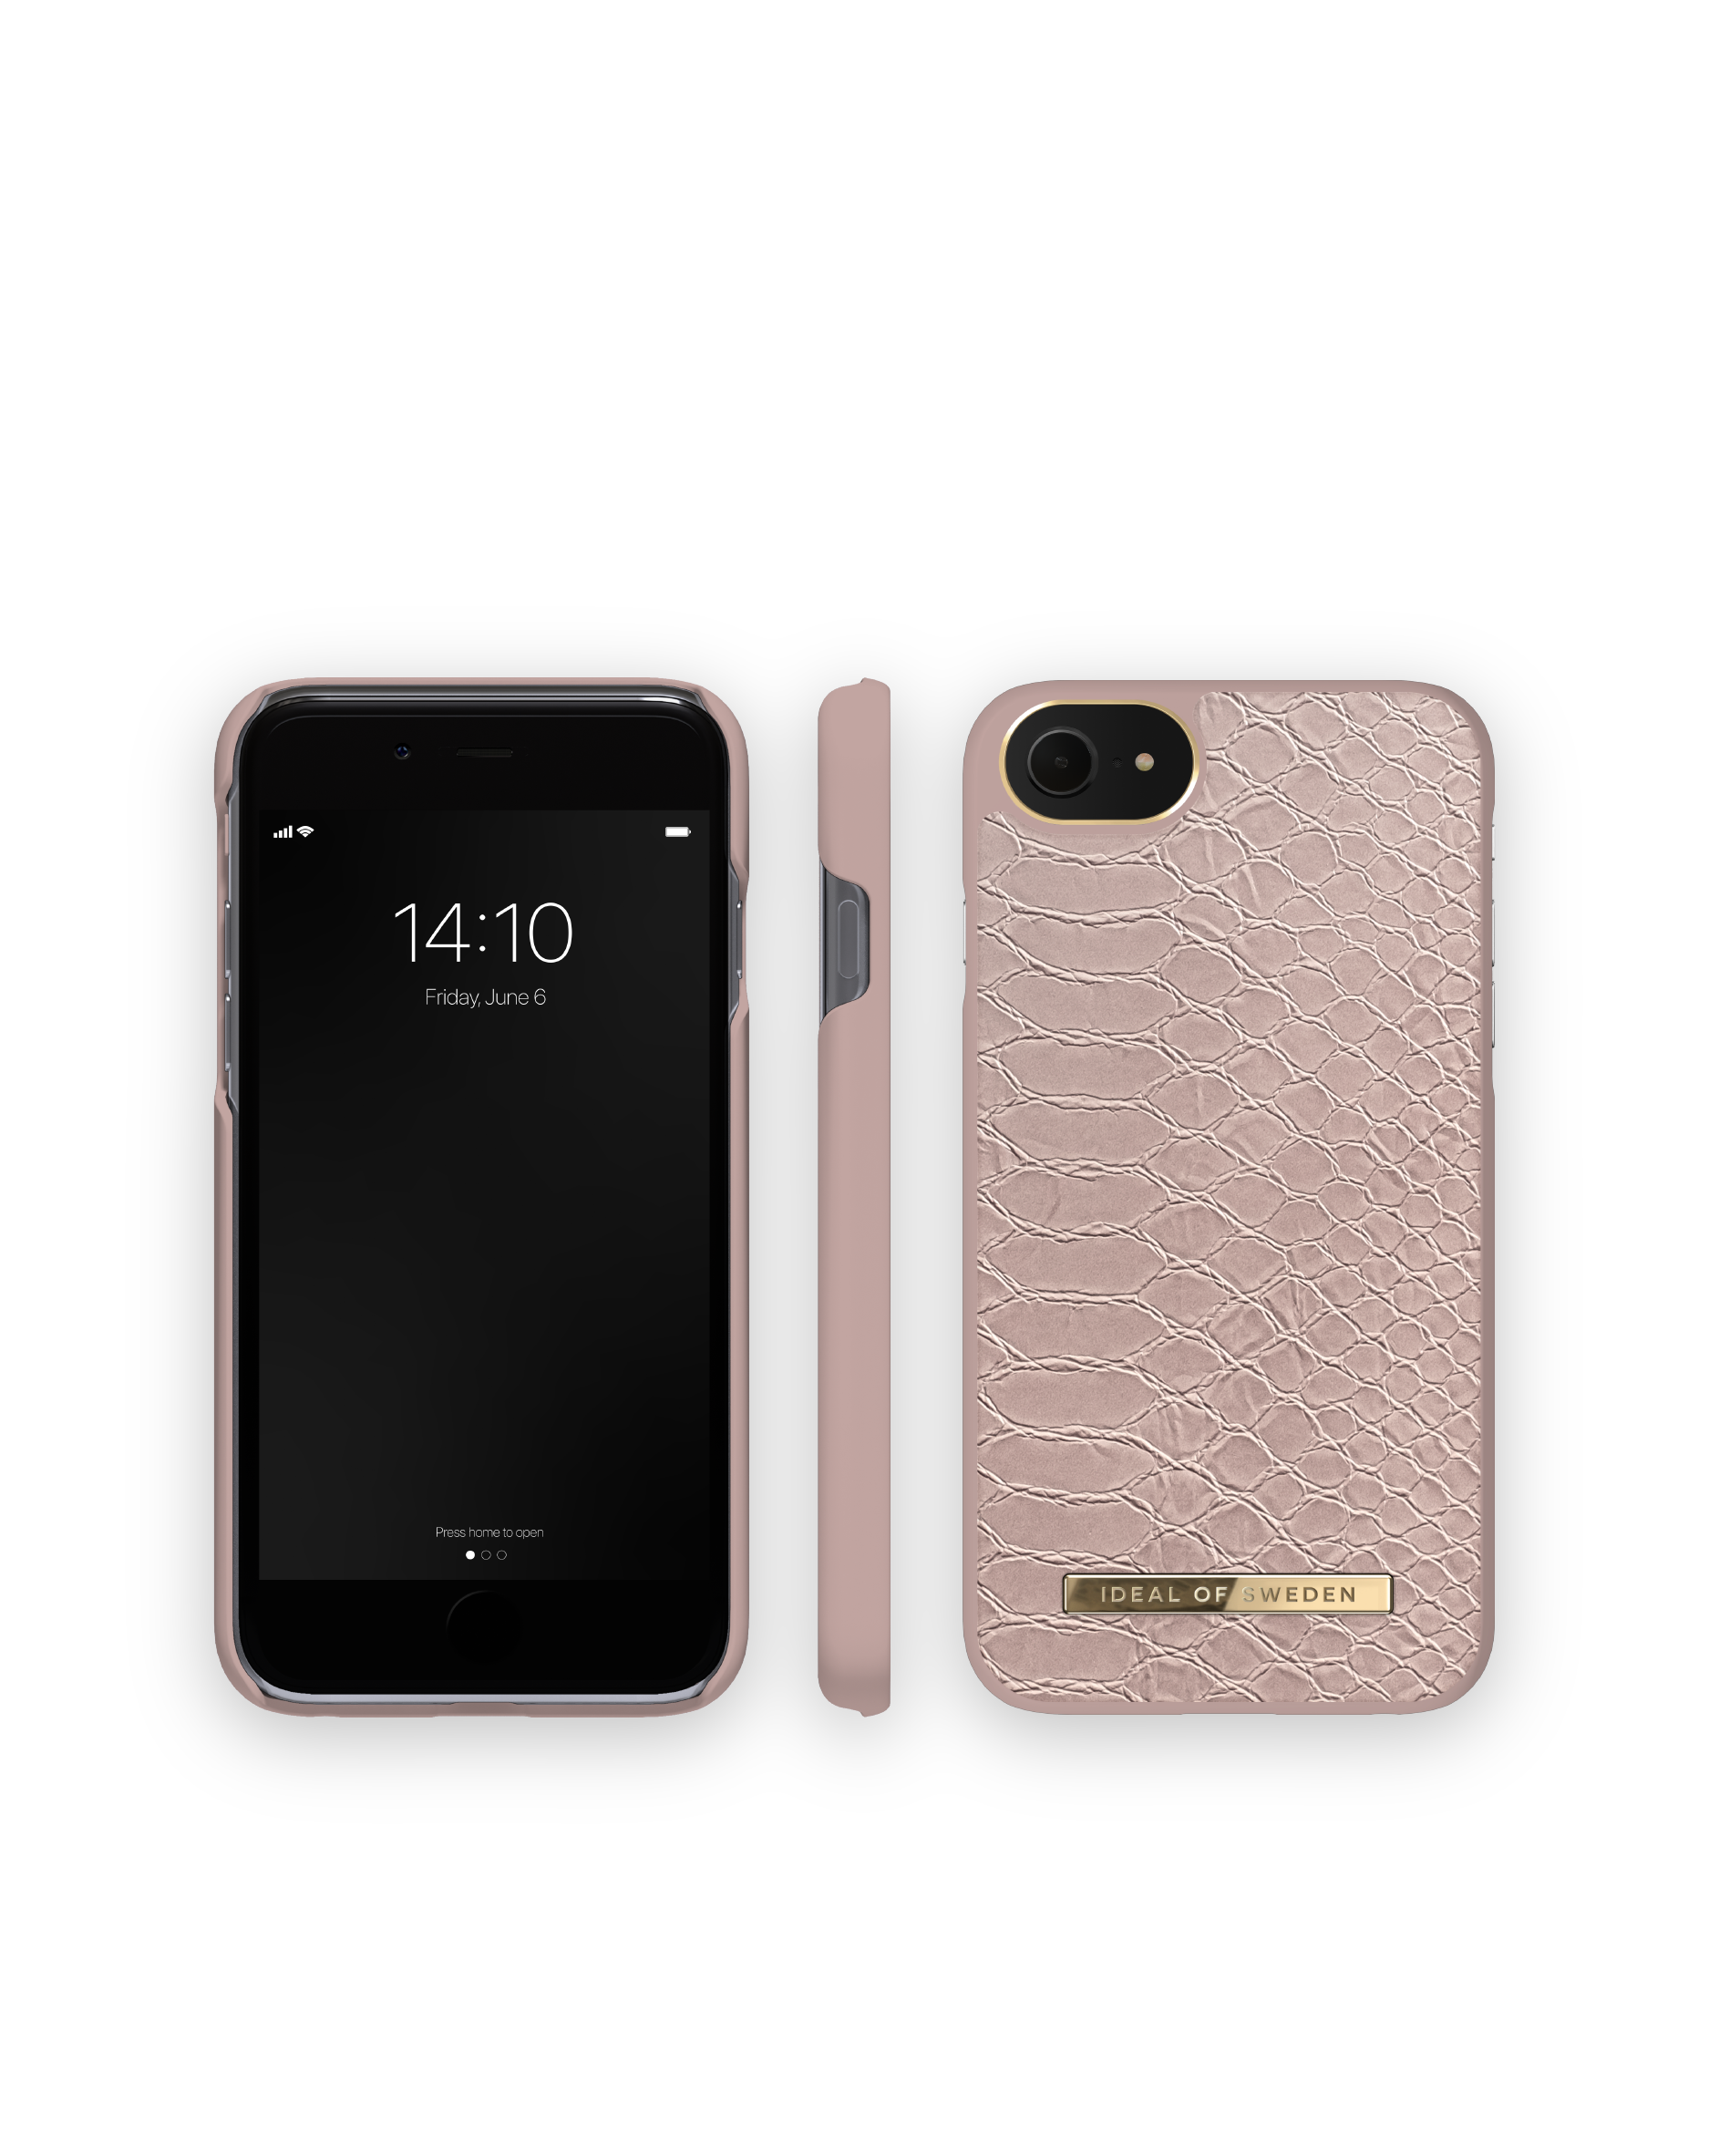 IDEAL OF iPhone SE 8, Apple (2020), Apple, iPhone iPhone Snake 7, 6(S), Apple Apple IDACAW20-I7-244, Apple Rose iPhone SWEDEN Backcover